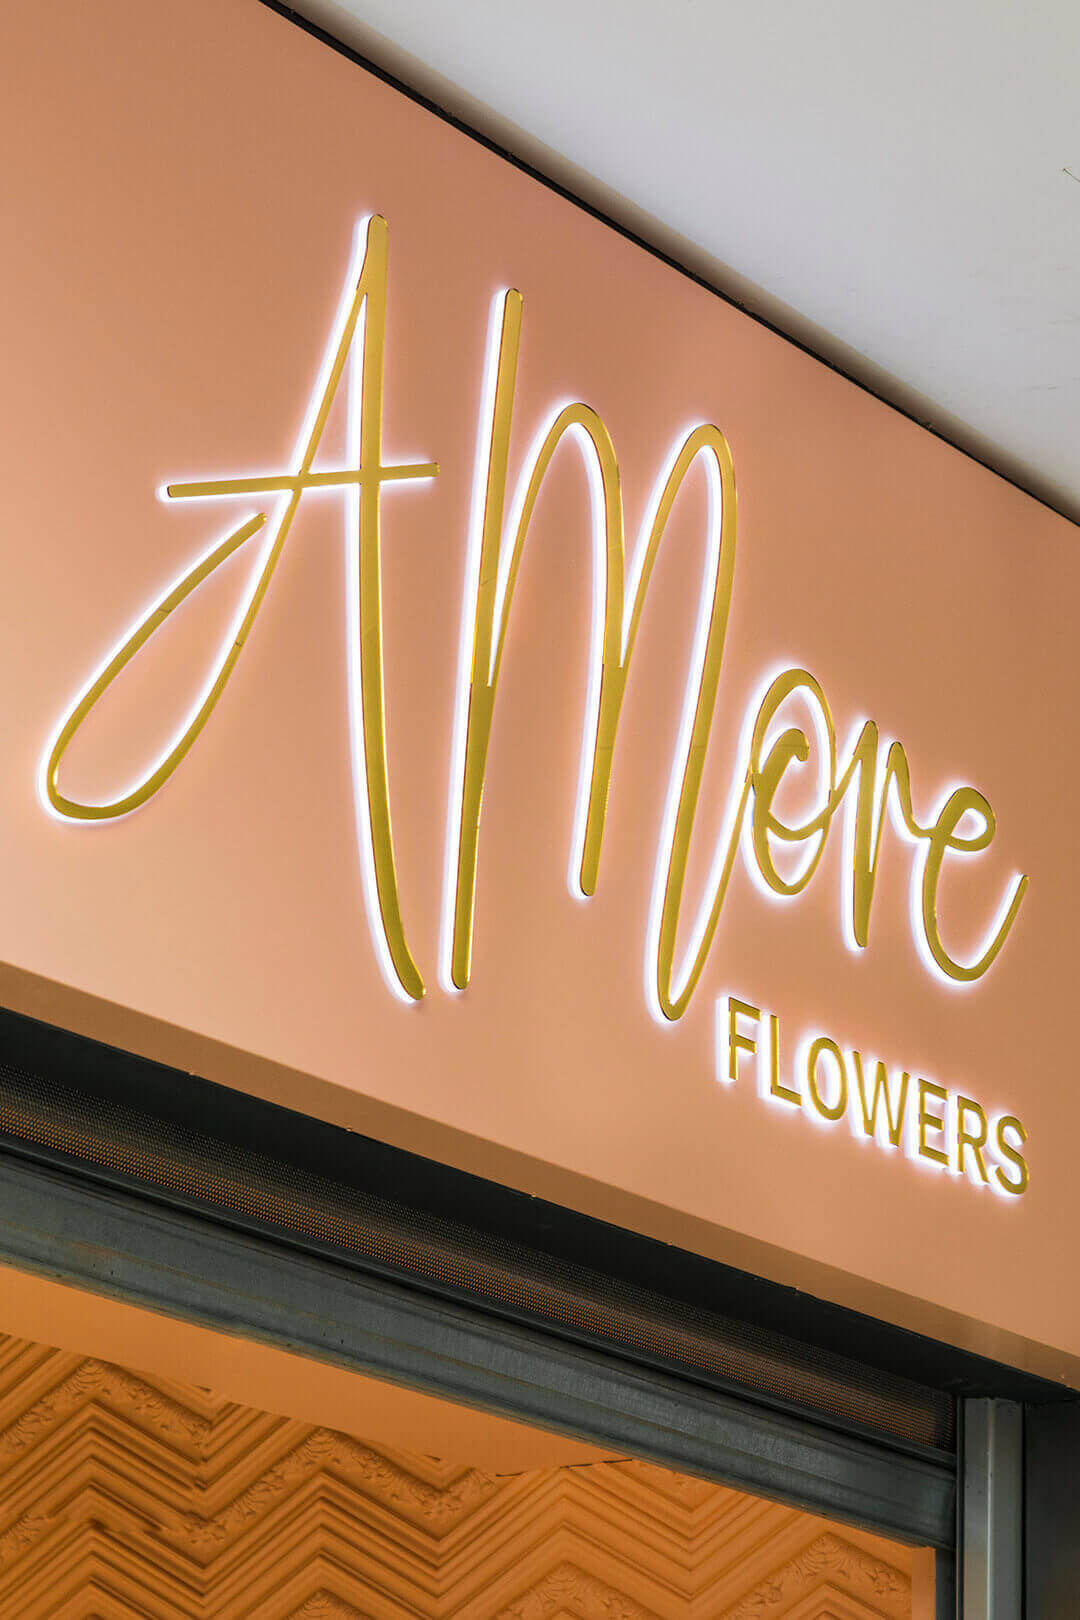 amore fleur amor flave - amore-flowers-casette-gdynia-riviera-casette-gold-letters-illuminated-coffer-casette-over-store-casette-over-entry-morelowe-florist (11) 